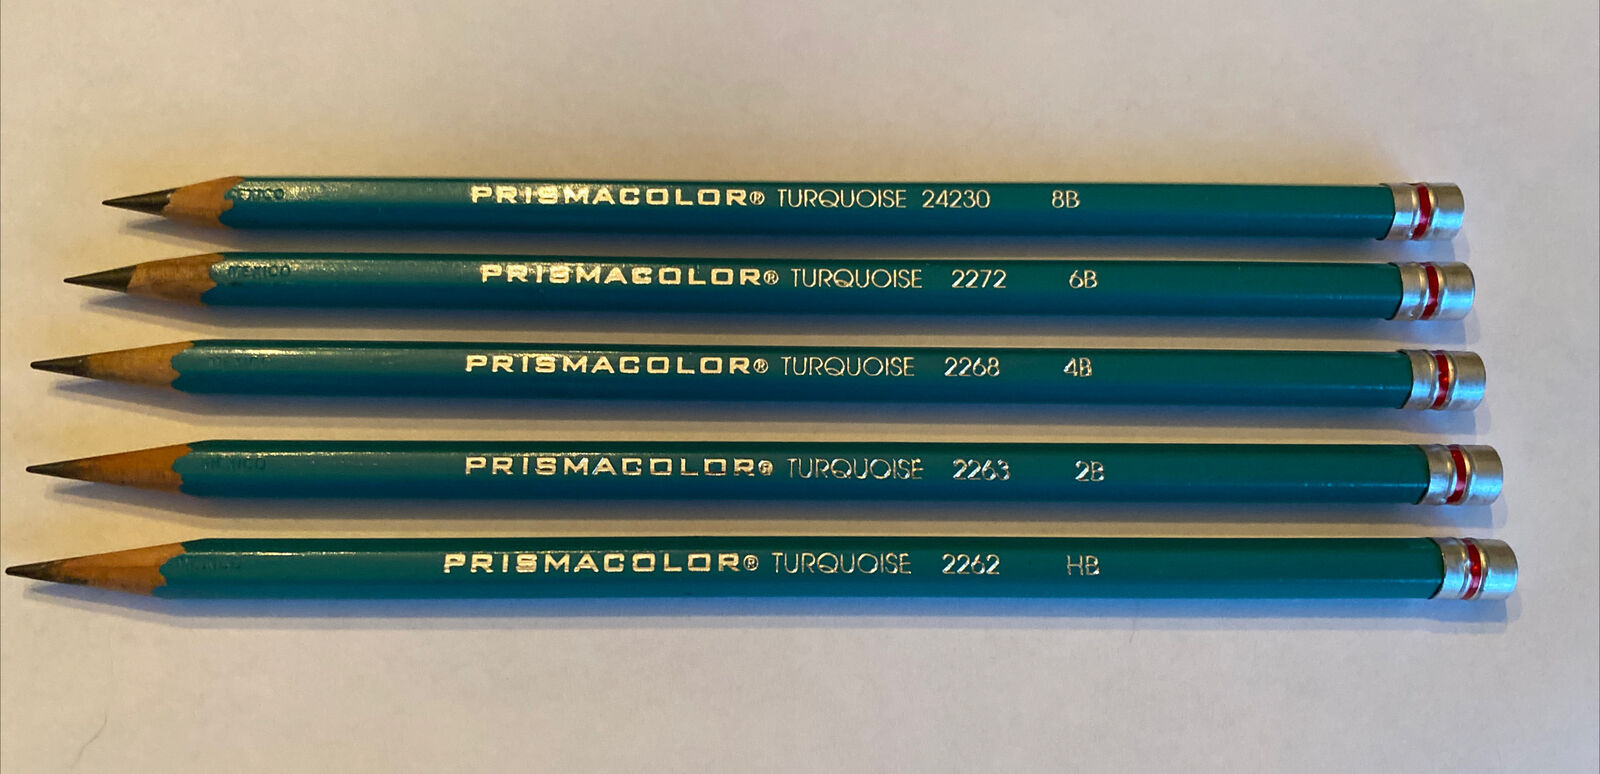 5 Prismacolor Turquoise Pencils HB, 2B, 4B, 6B, 8B Sharpened Some Lightly Used